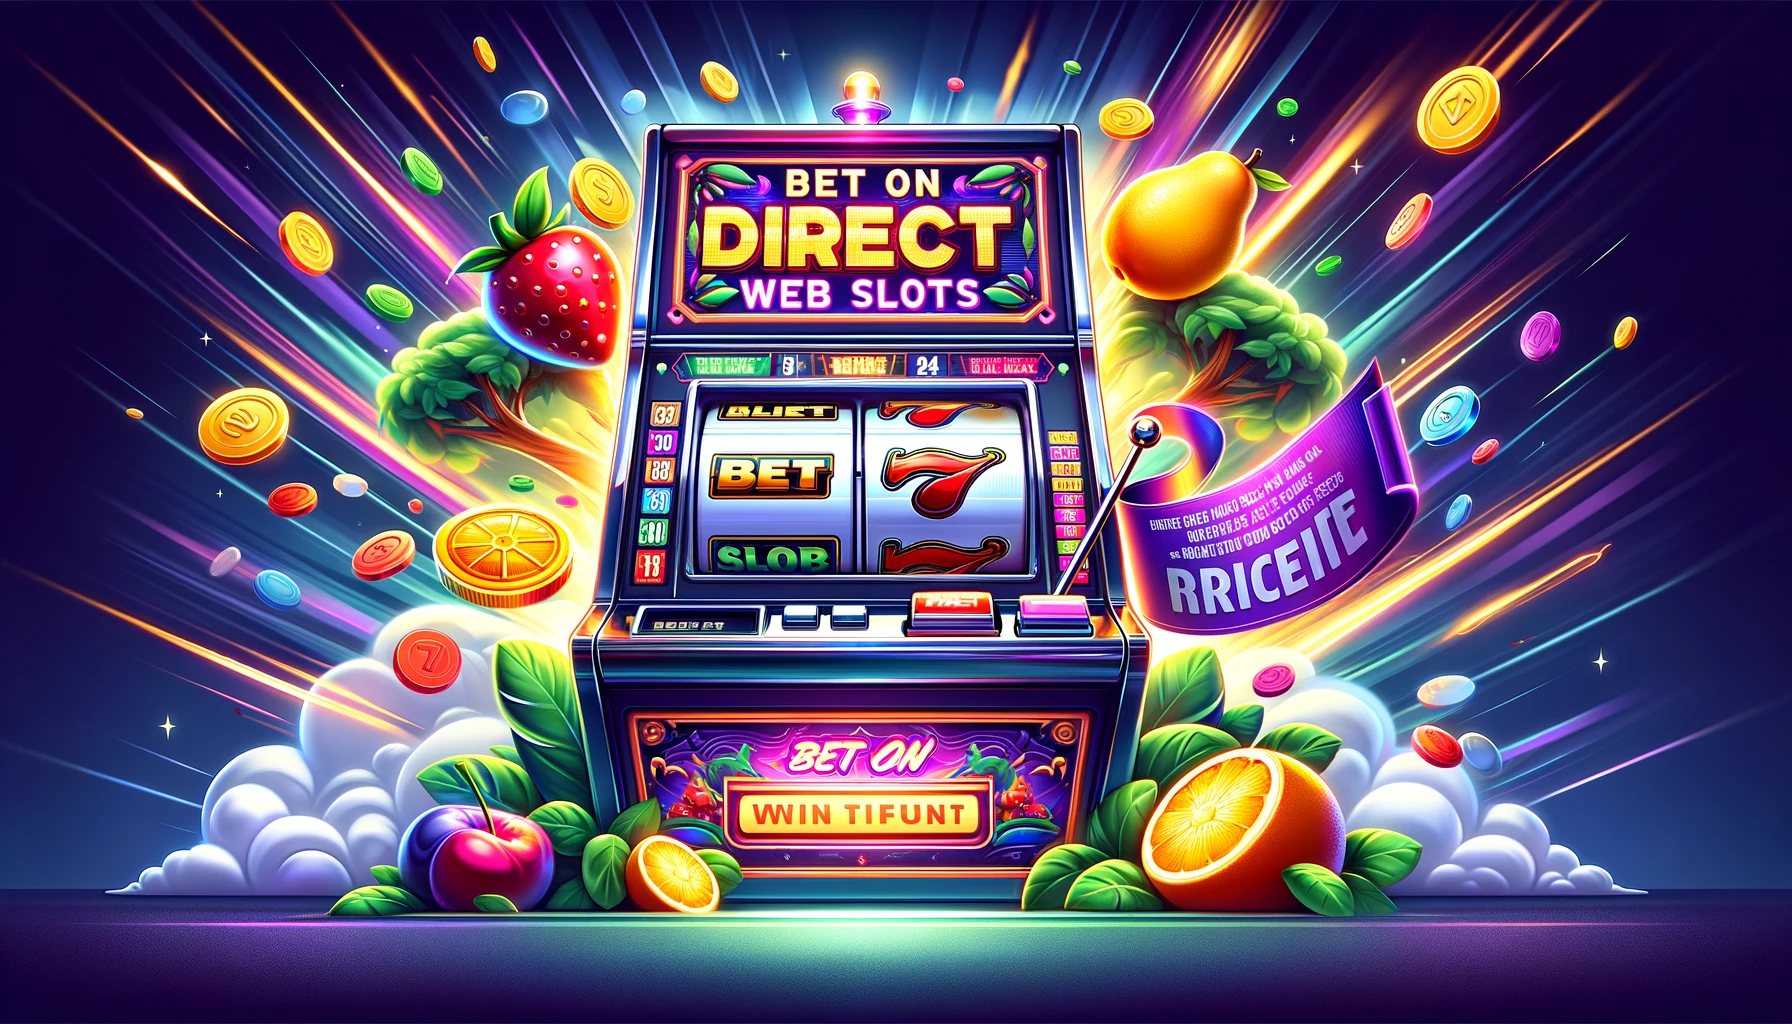 Bet on direct web slots